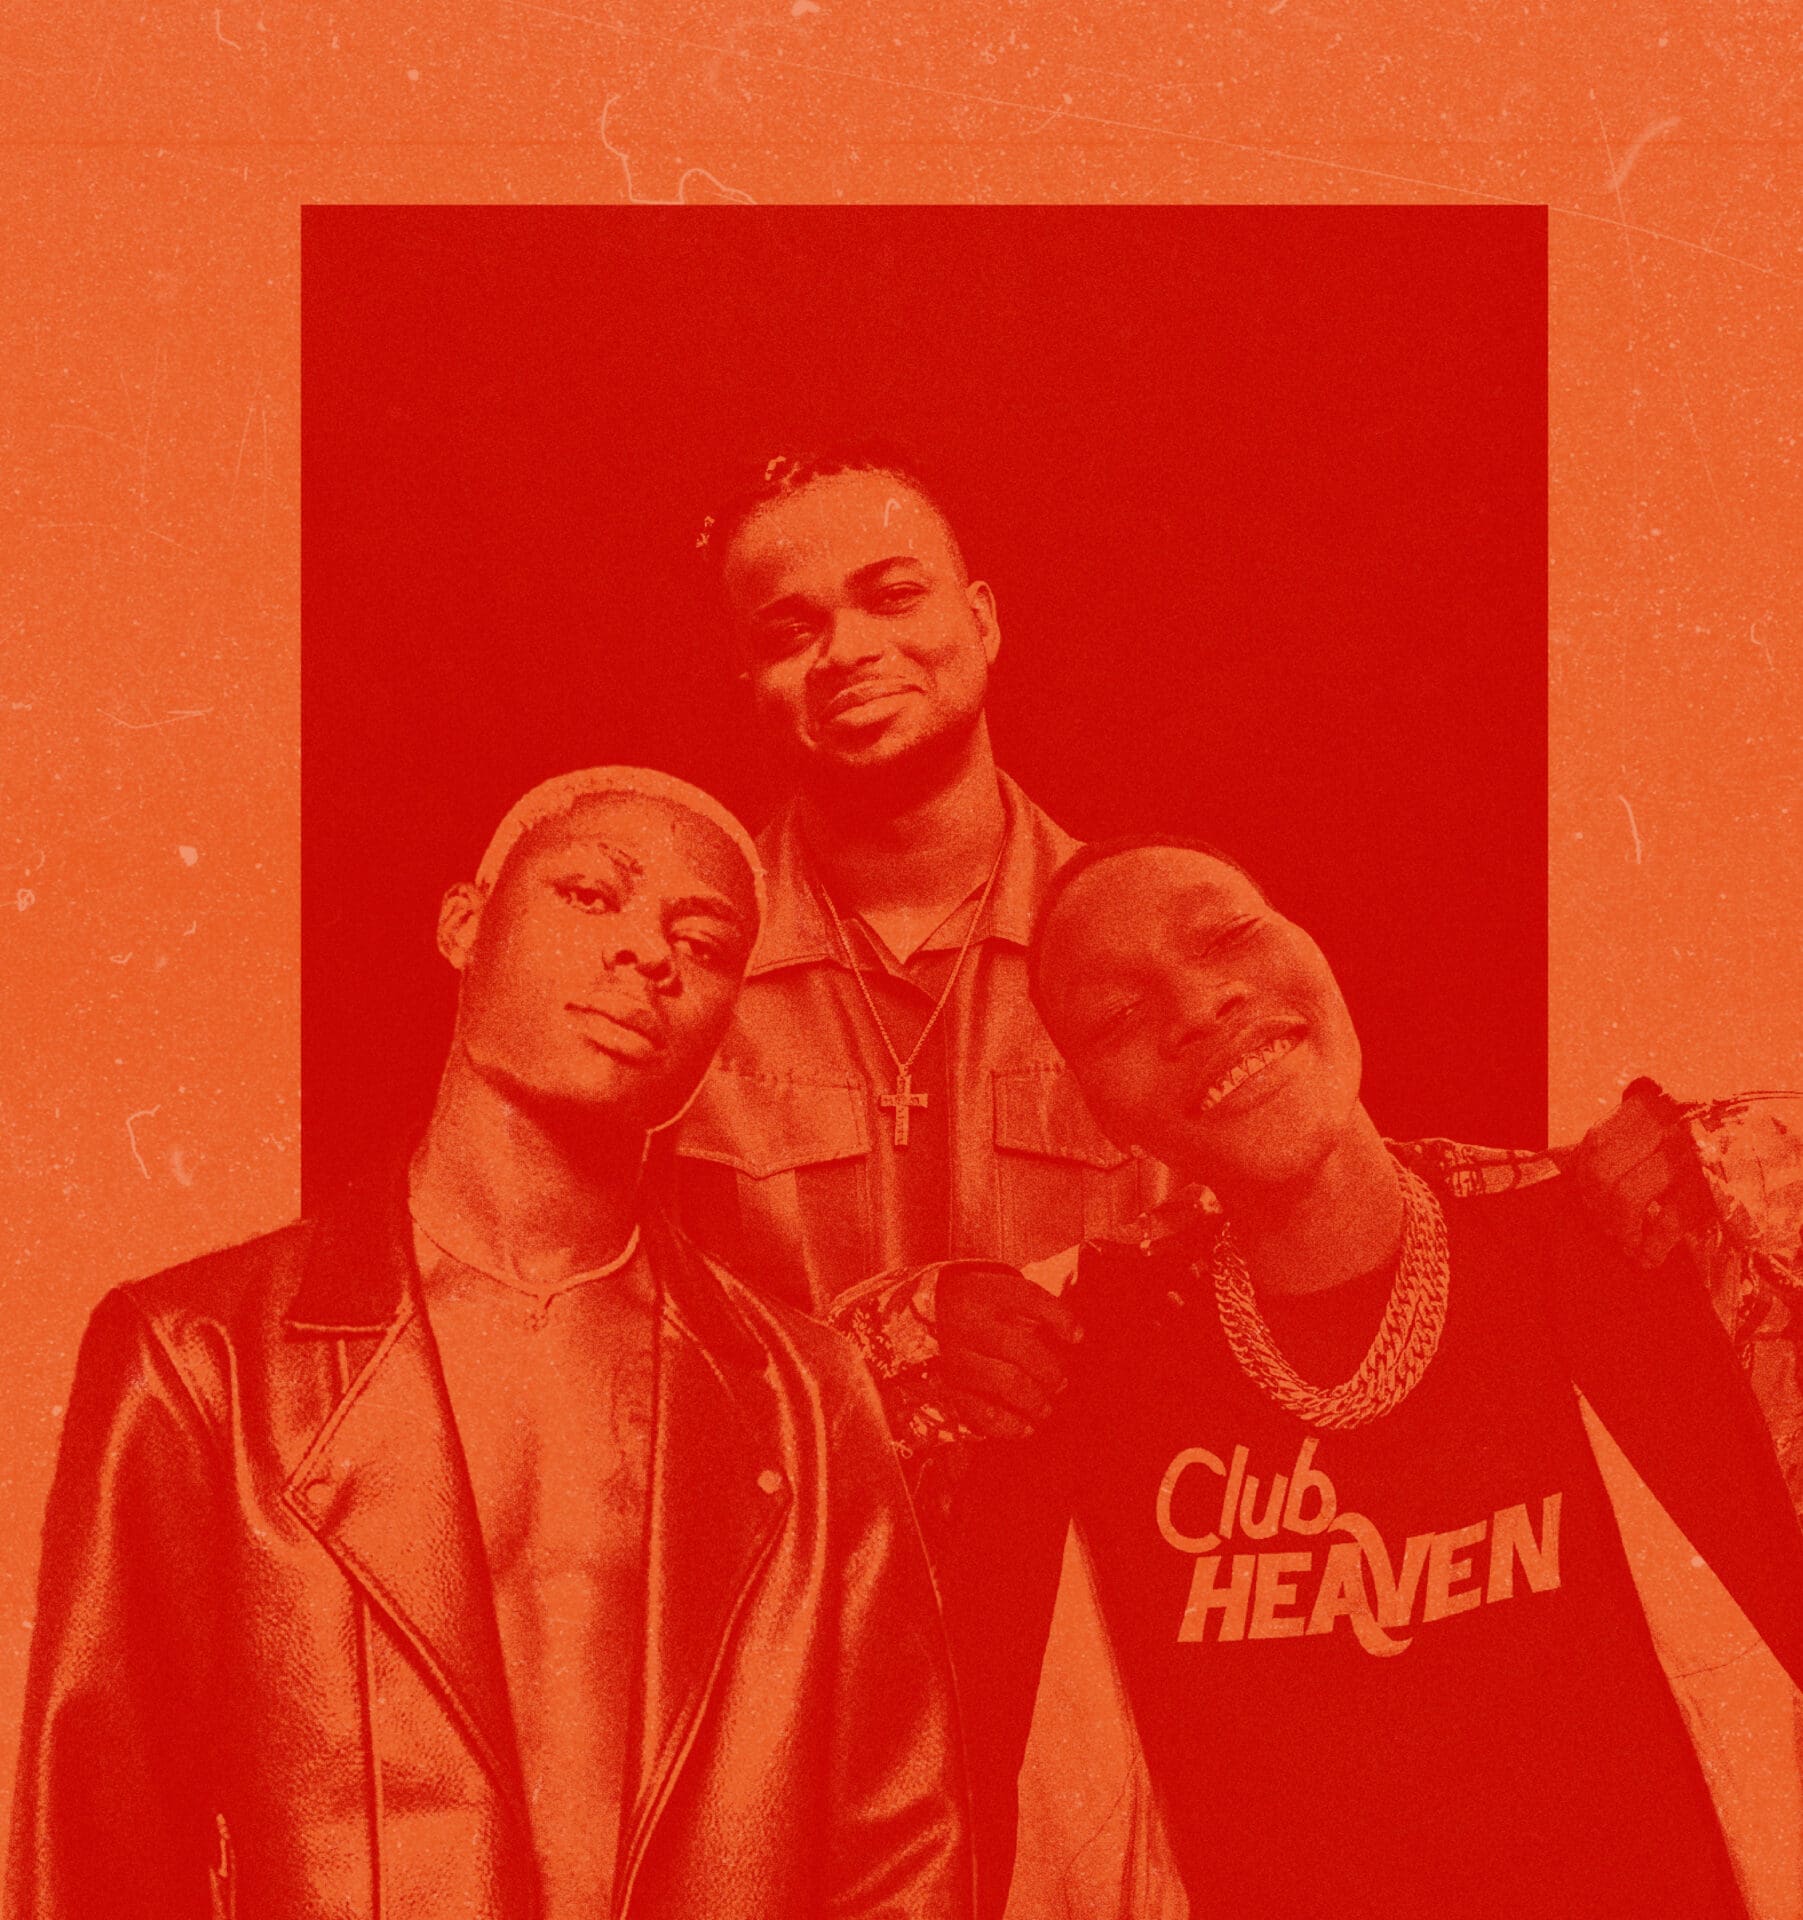 A red and orange graphic collage featuring Nigerian artists Mohbad, Rexxie and Zinoleesky